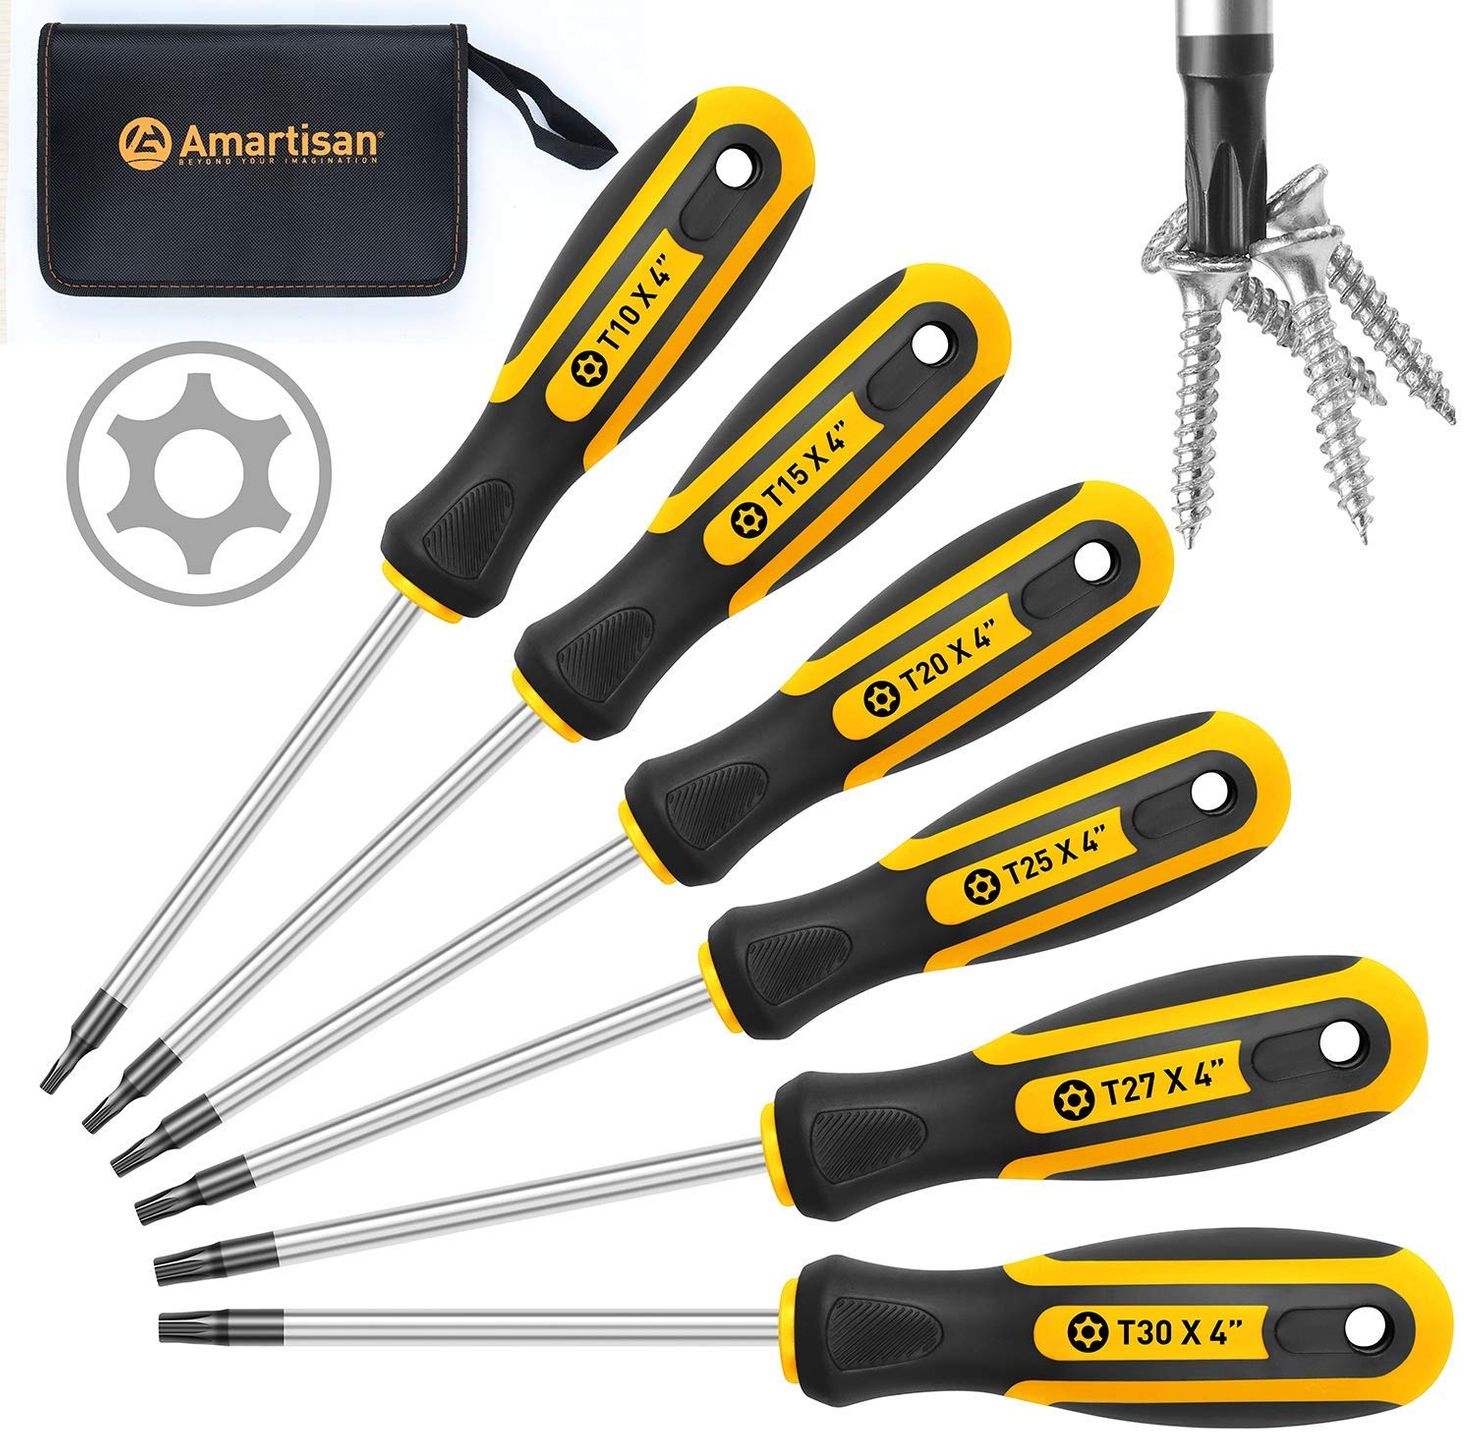 23 in 1 mini screwdriver set for computer mobile phone automobile bicycle workshop telephone Repair tools EDC magnet Screwdriver set Slotted Hex Phillips Torx Hexgonal